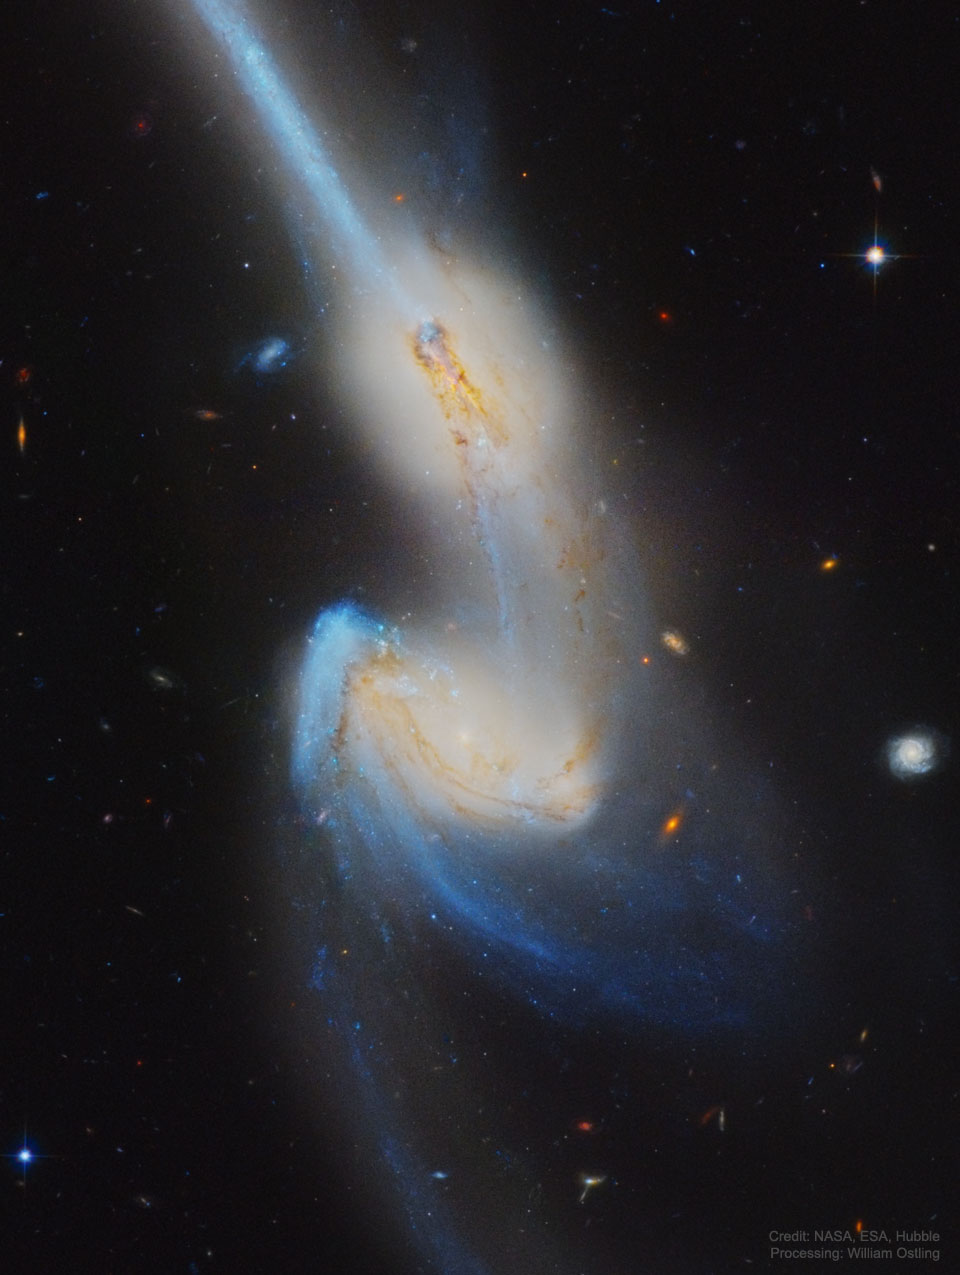 The picture shows a Hubble image of colliding galaxies NGC 4676
known as the Mice for their long stellar tails.
Please see the explanation for more detailed information.